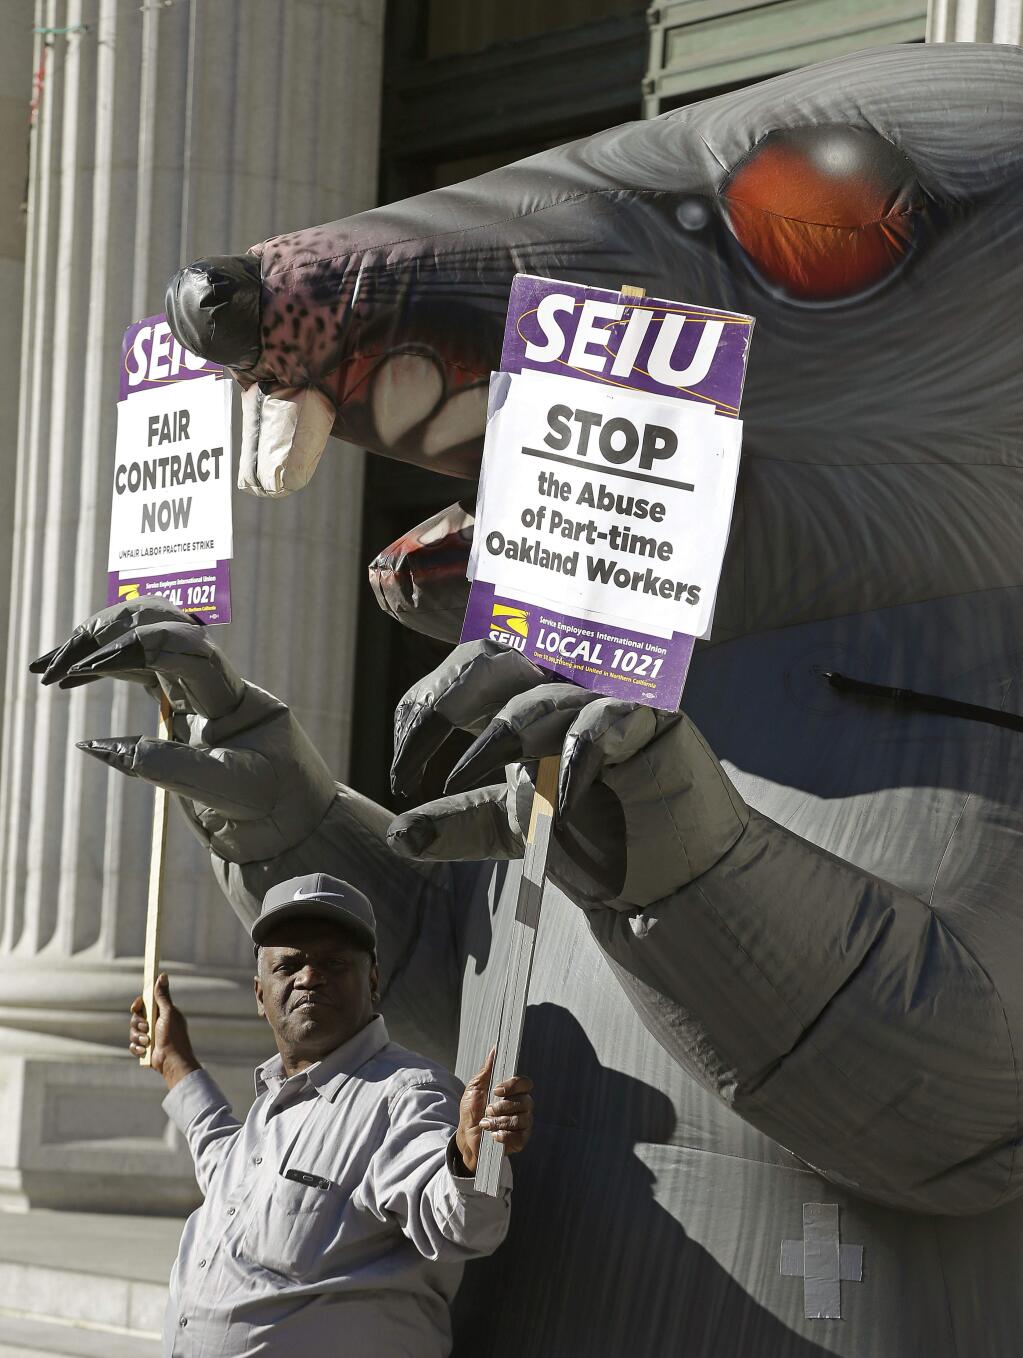 City of Oakland worker Melvin Beal places his picket signs in the paws of an inflatable rat in front of City Hall on Tuesday, Dec. 5, 2017, in Oakland, Calif. (AP Photo/Ben Margot)